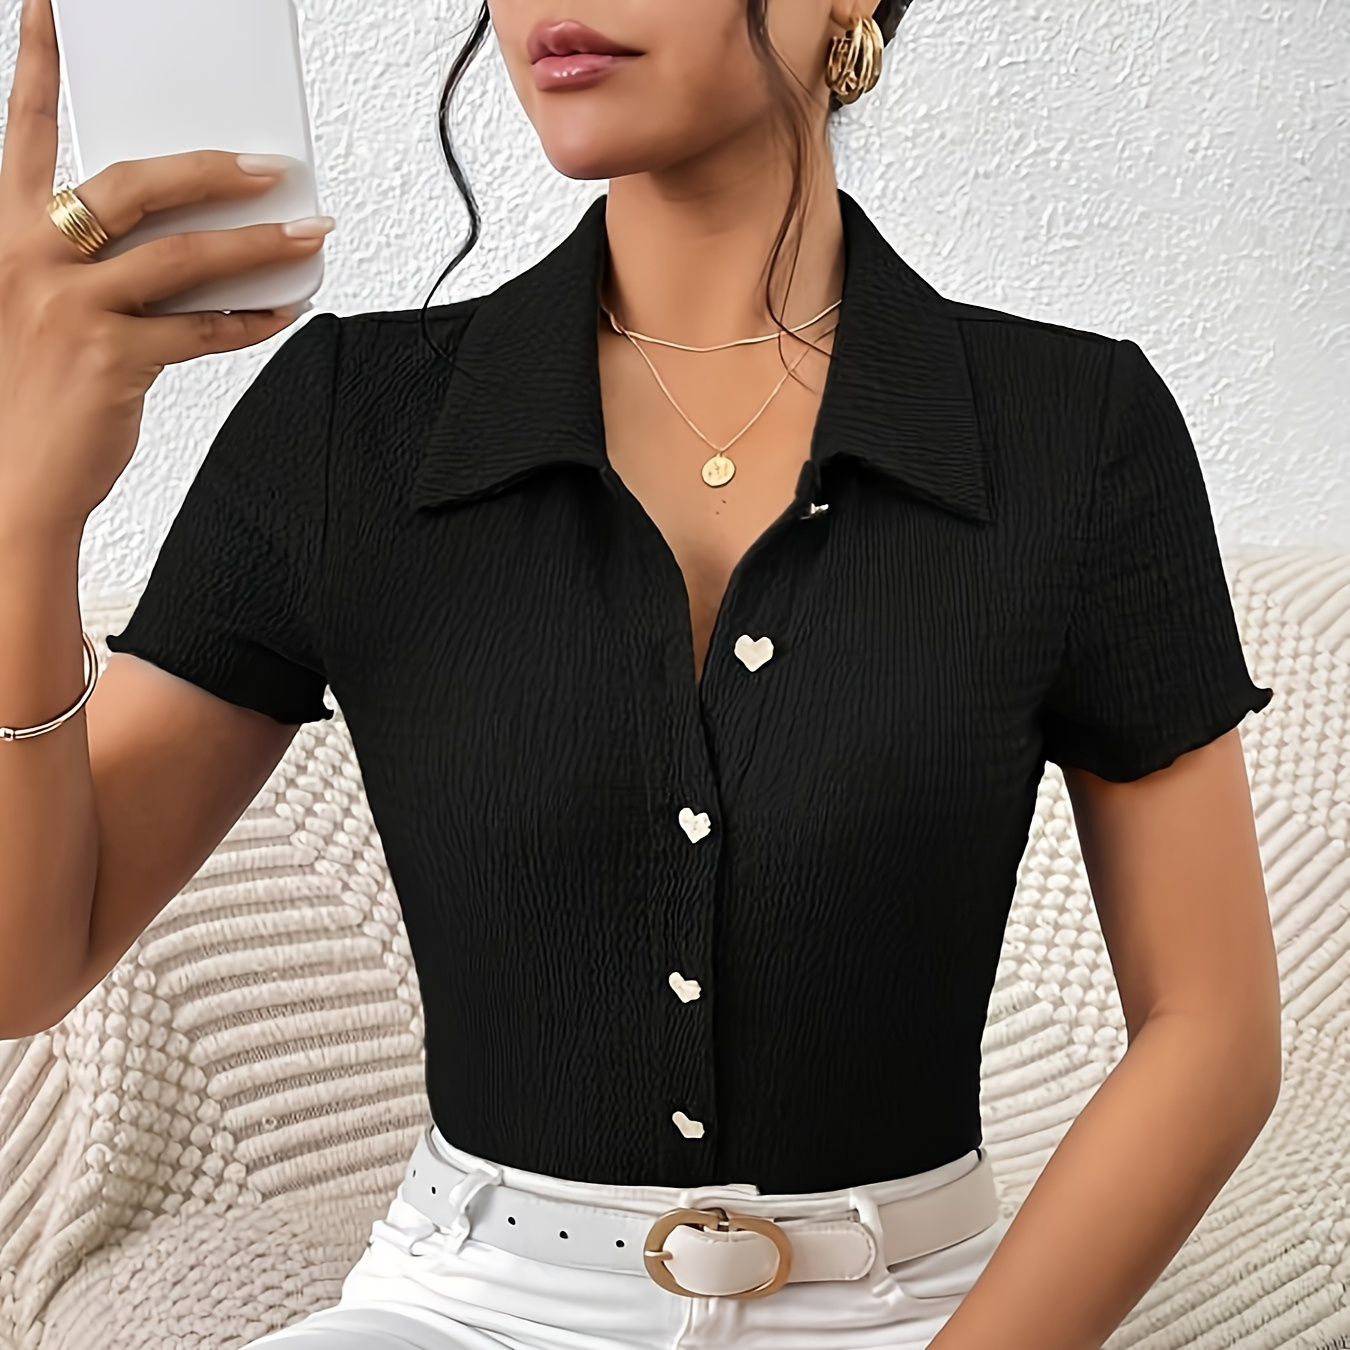 

Solid Heart Shaped Button Slim Shirt, Cute Short Sleeve Shirt For Spring & Summer, Women's Clothing